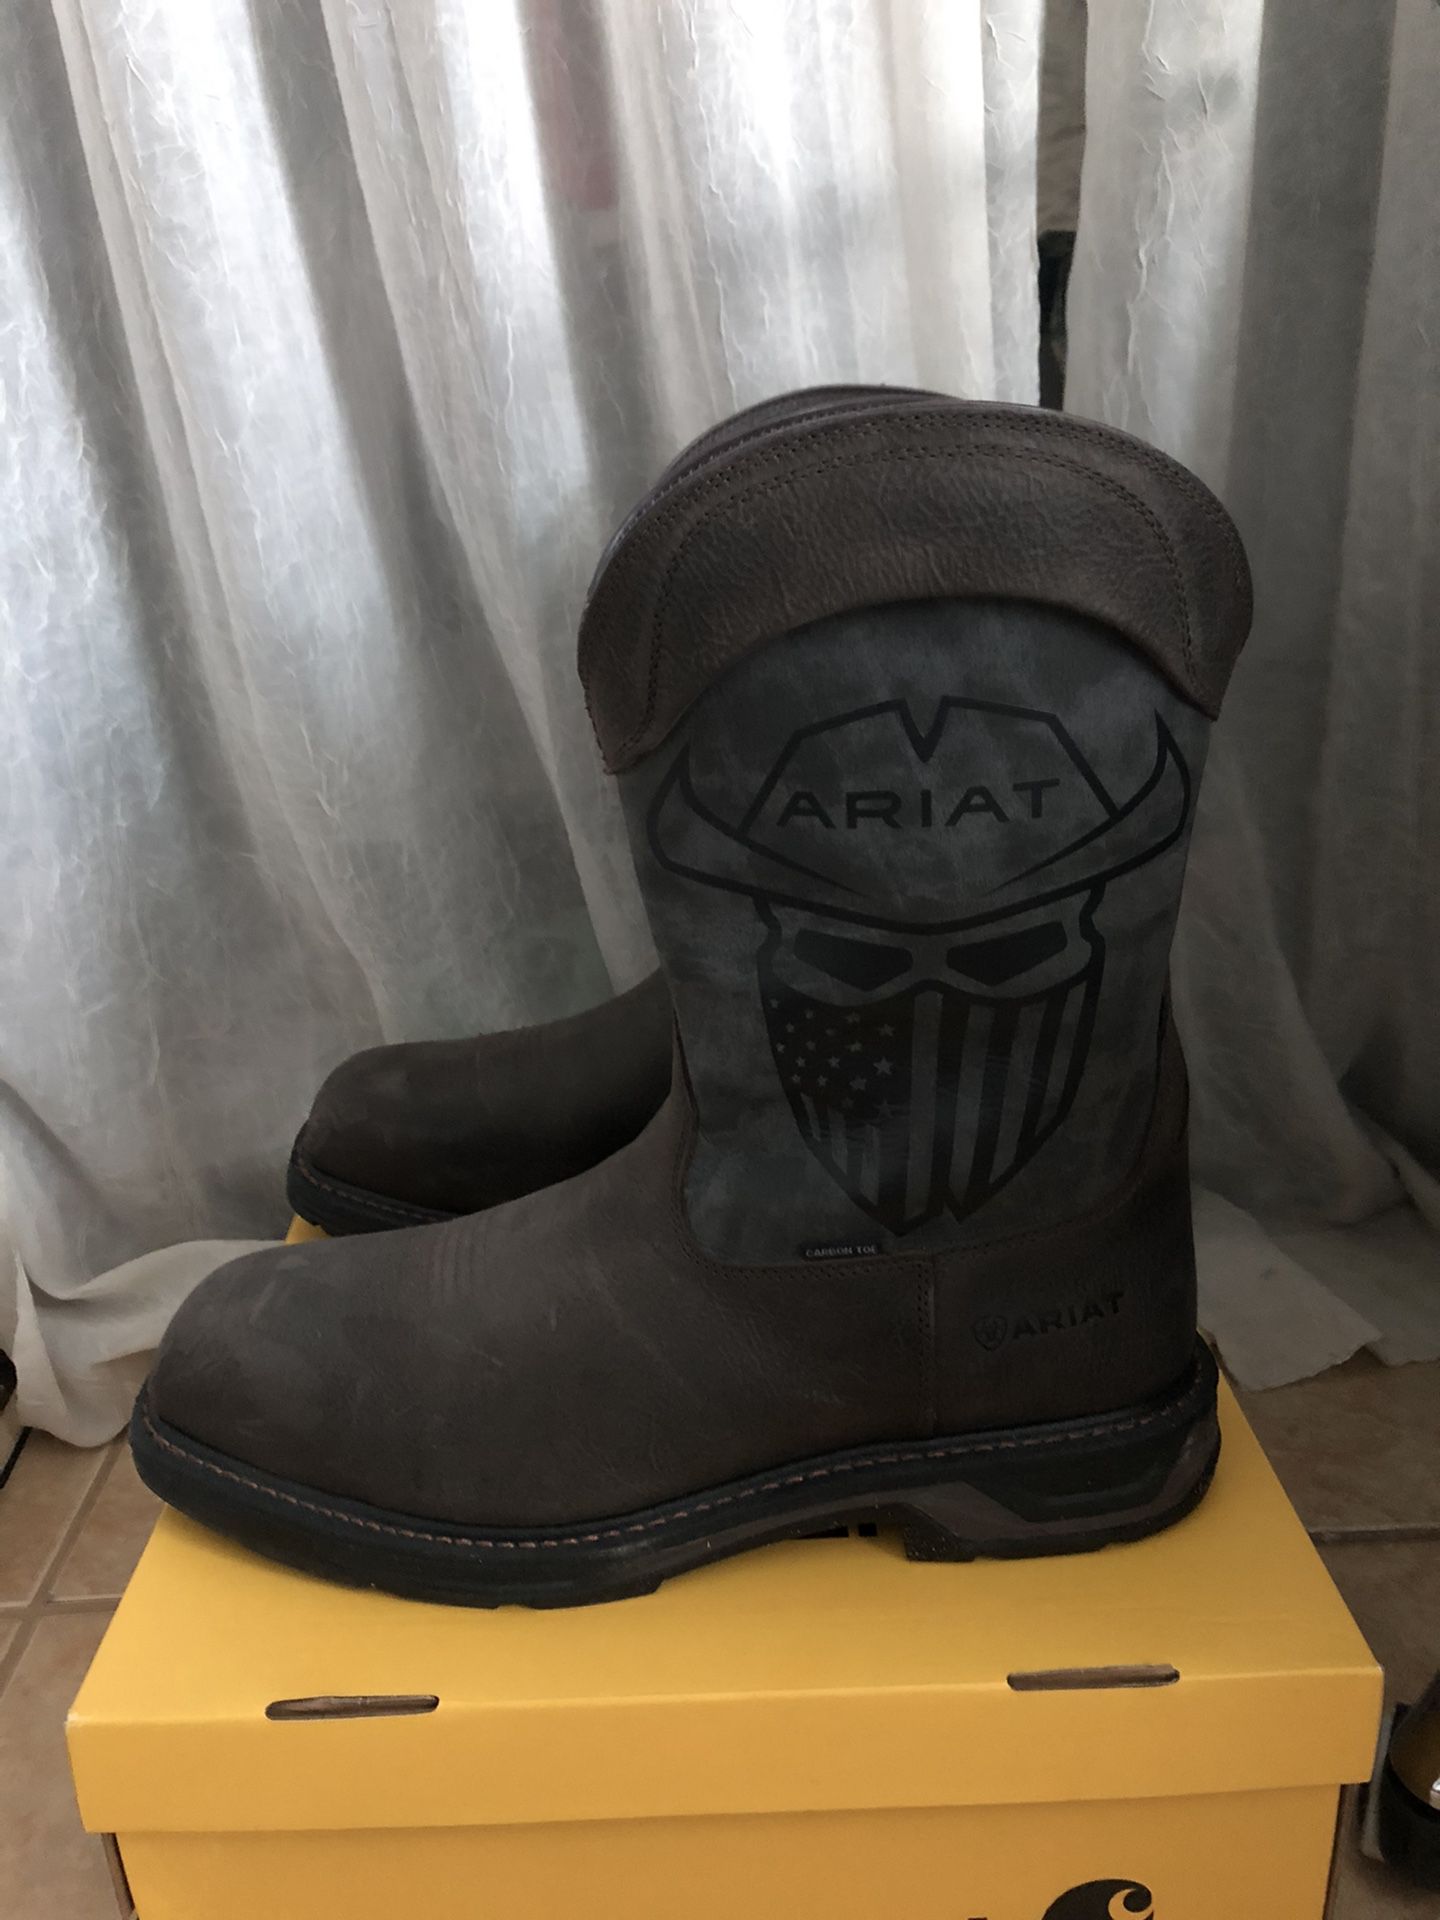 PULL ON COMPOSITE TOE WORK BOOT